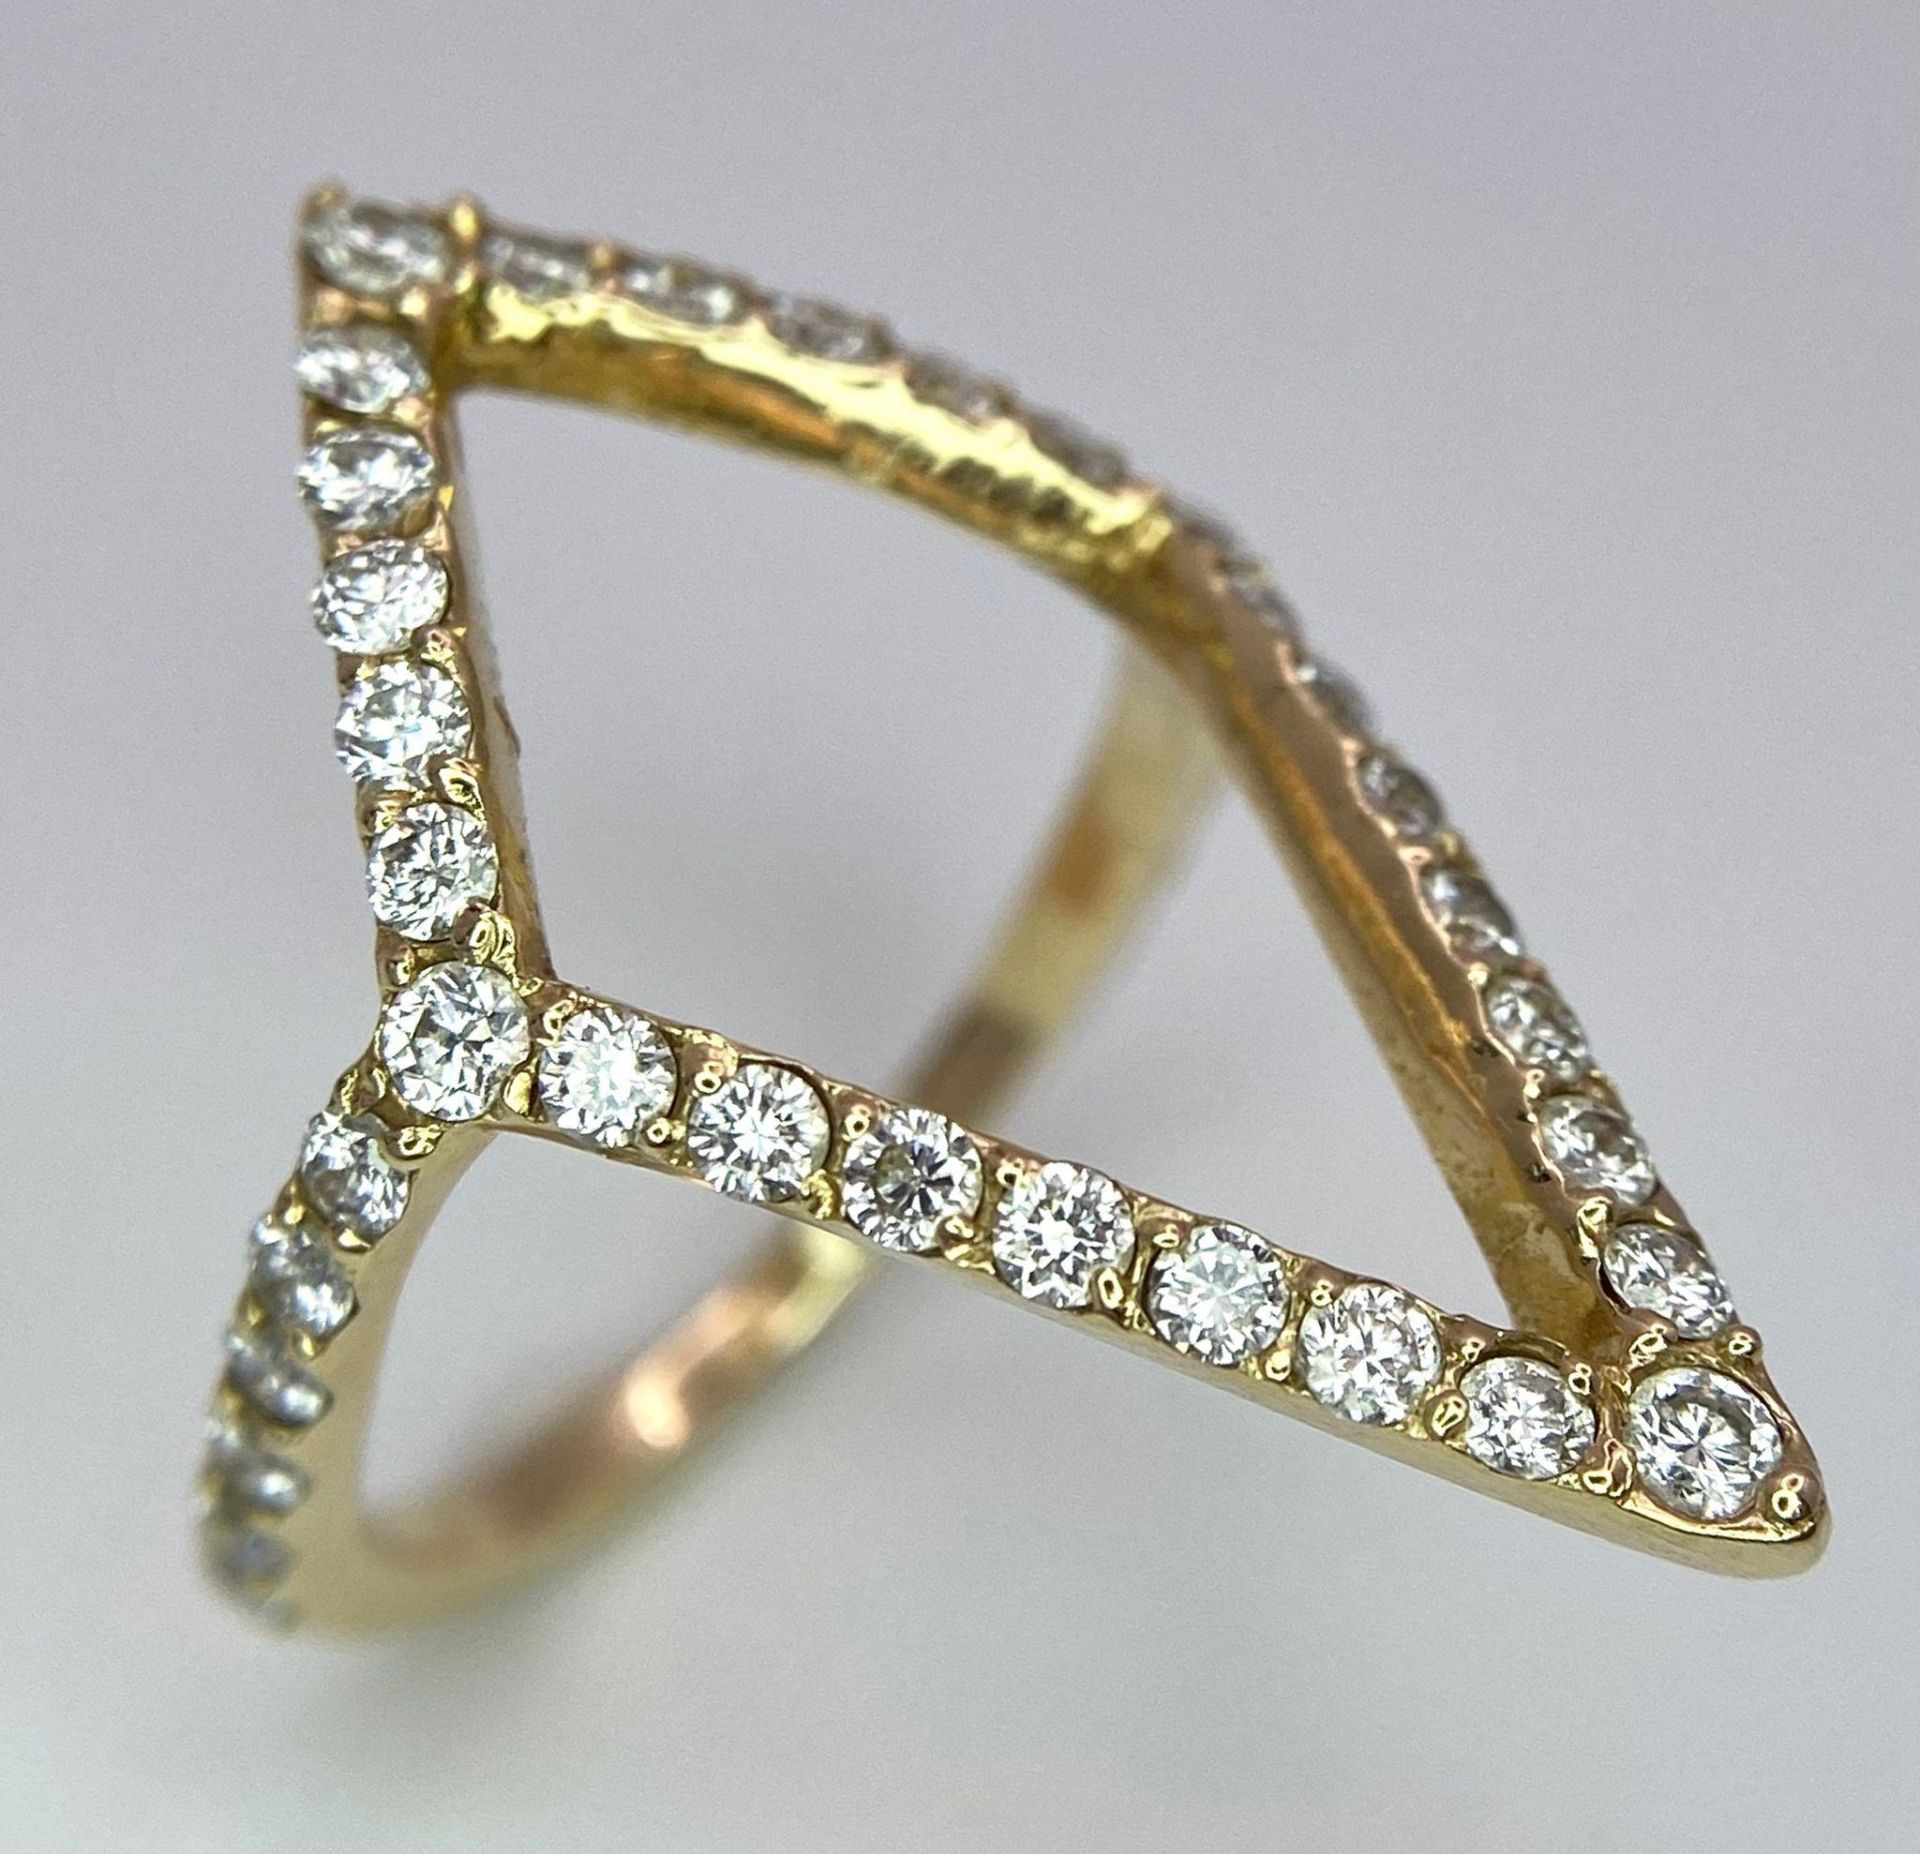 An 18K Yellow Gold (tested) Diamond Trillion Shaped Ring. Size J. 2.6g weight. Ref: 016674